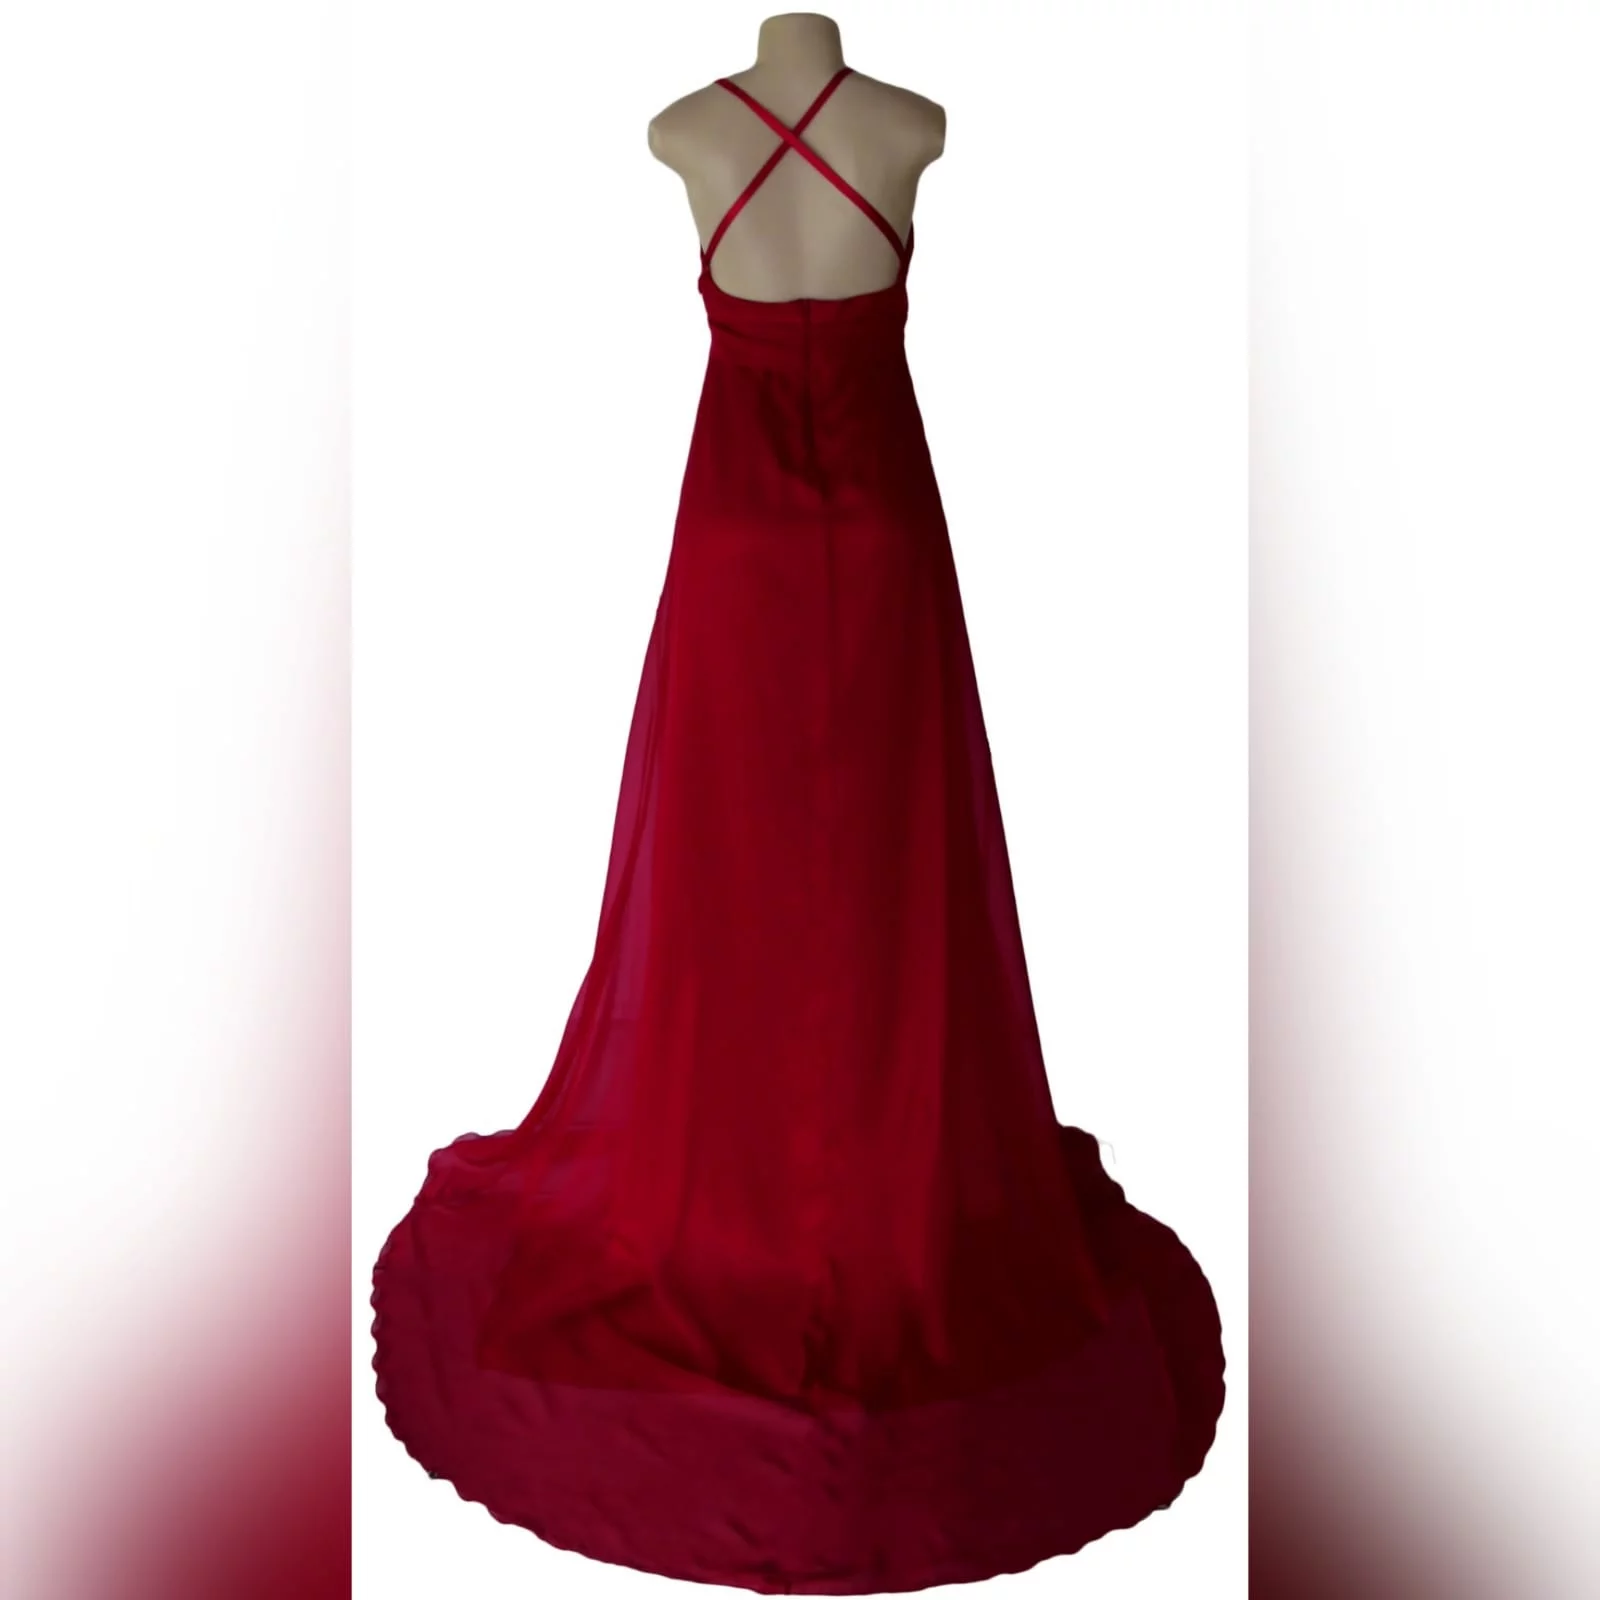 Long red flowy formal dress 3 long red flowy formal dress, with a low v neckline, low open back with crossed thin shoulder straps. Wide waist belt, high slit and a train. A design suitable for various occasions, made per measurements any colour you want.